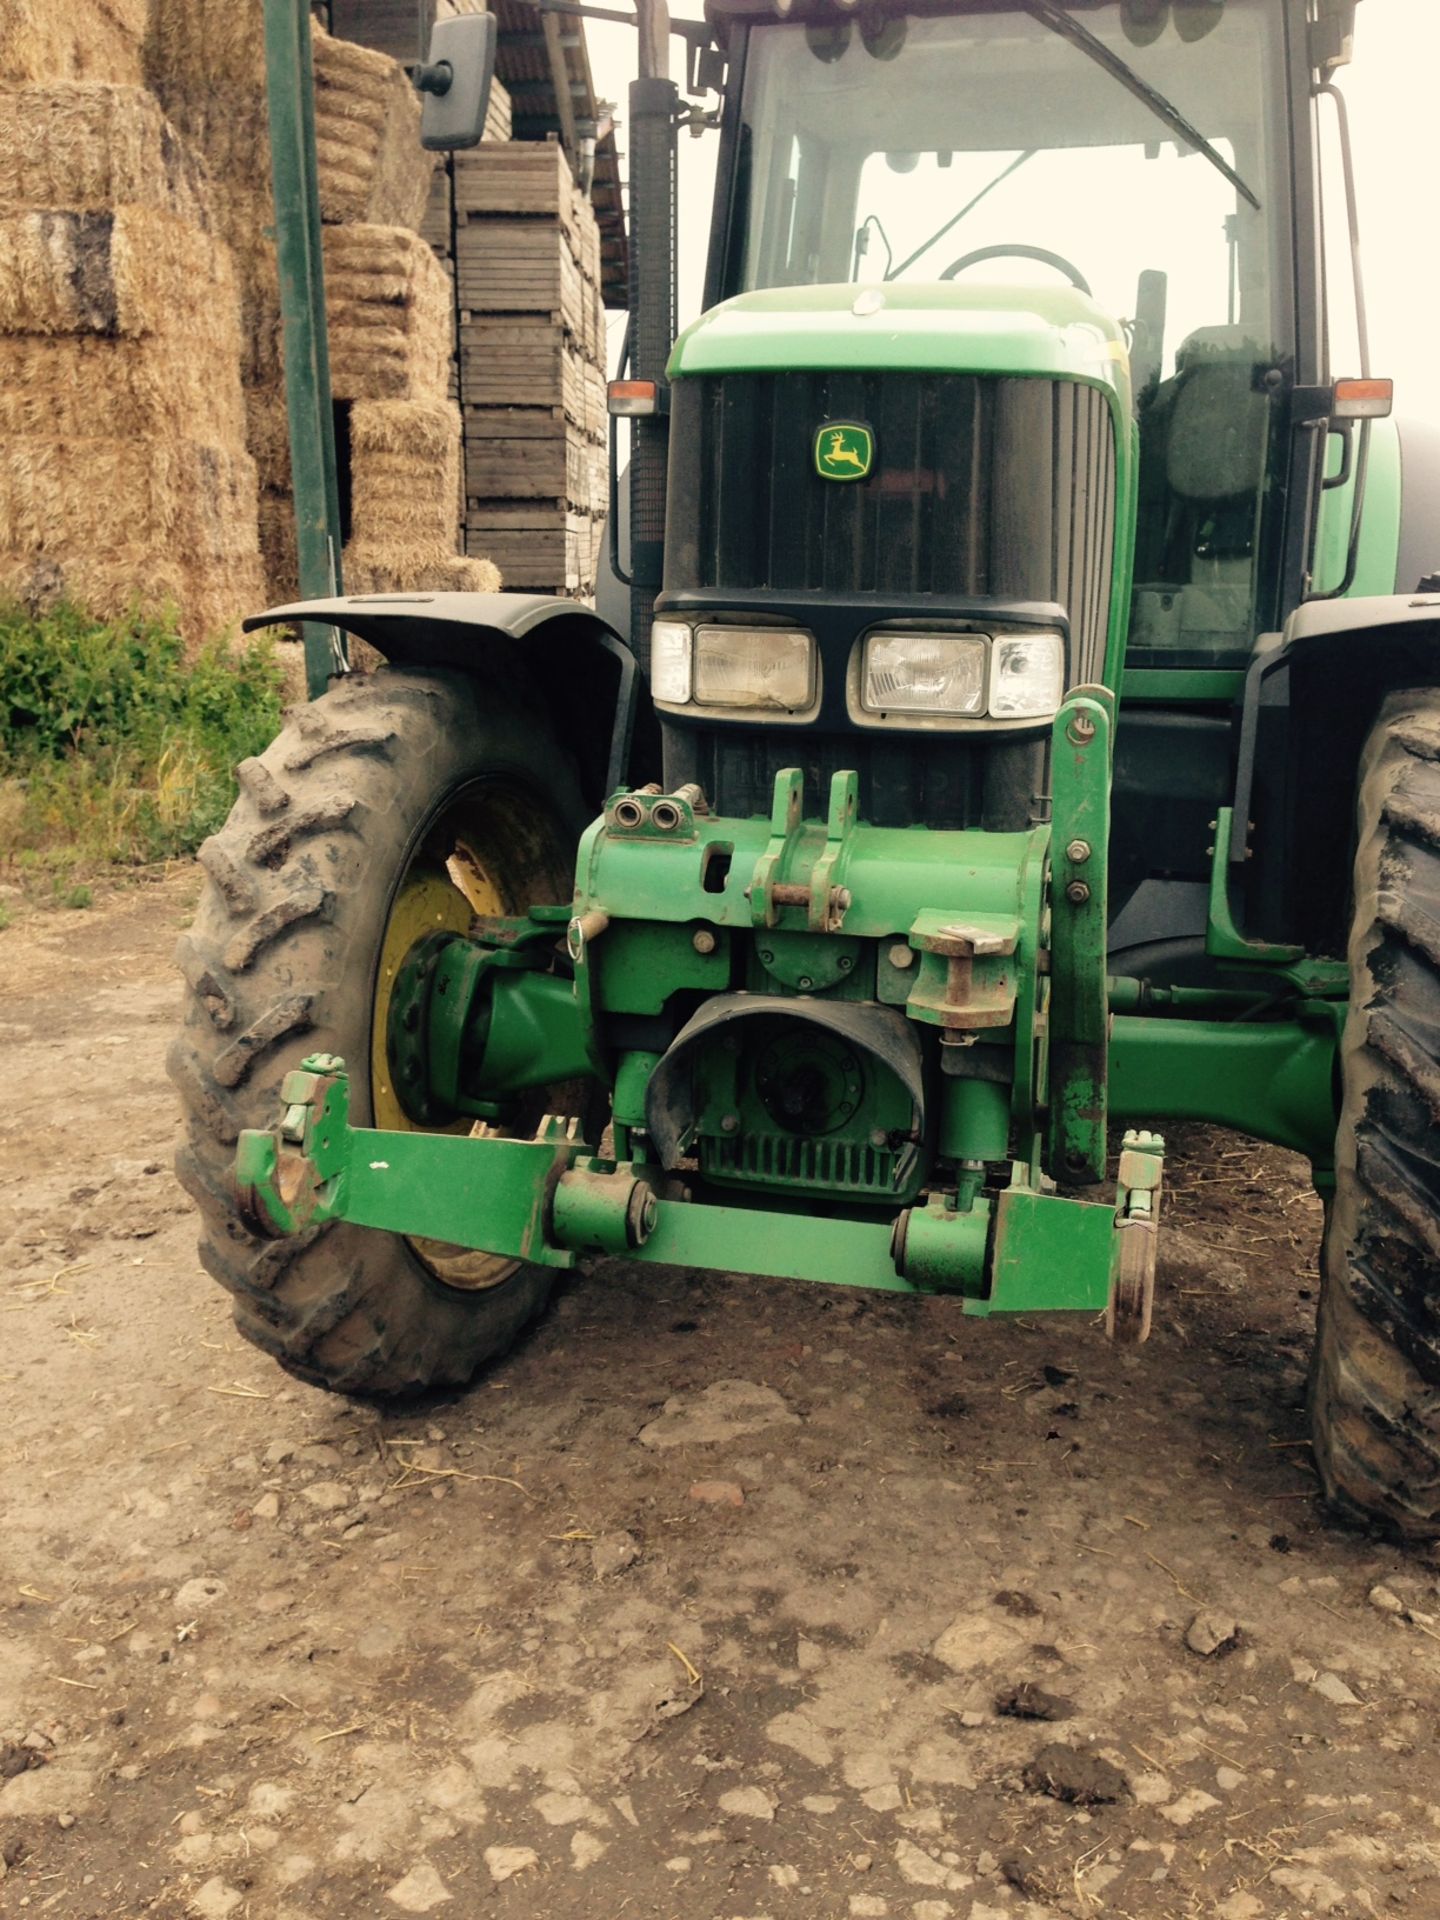 2005 John Deere 6920S Tractor 50k Power Quad c/w front linkage & pto. Location Bourne, Lincolnshire - Image 4 of 12